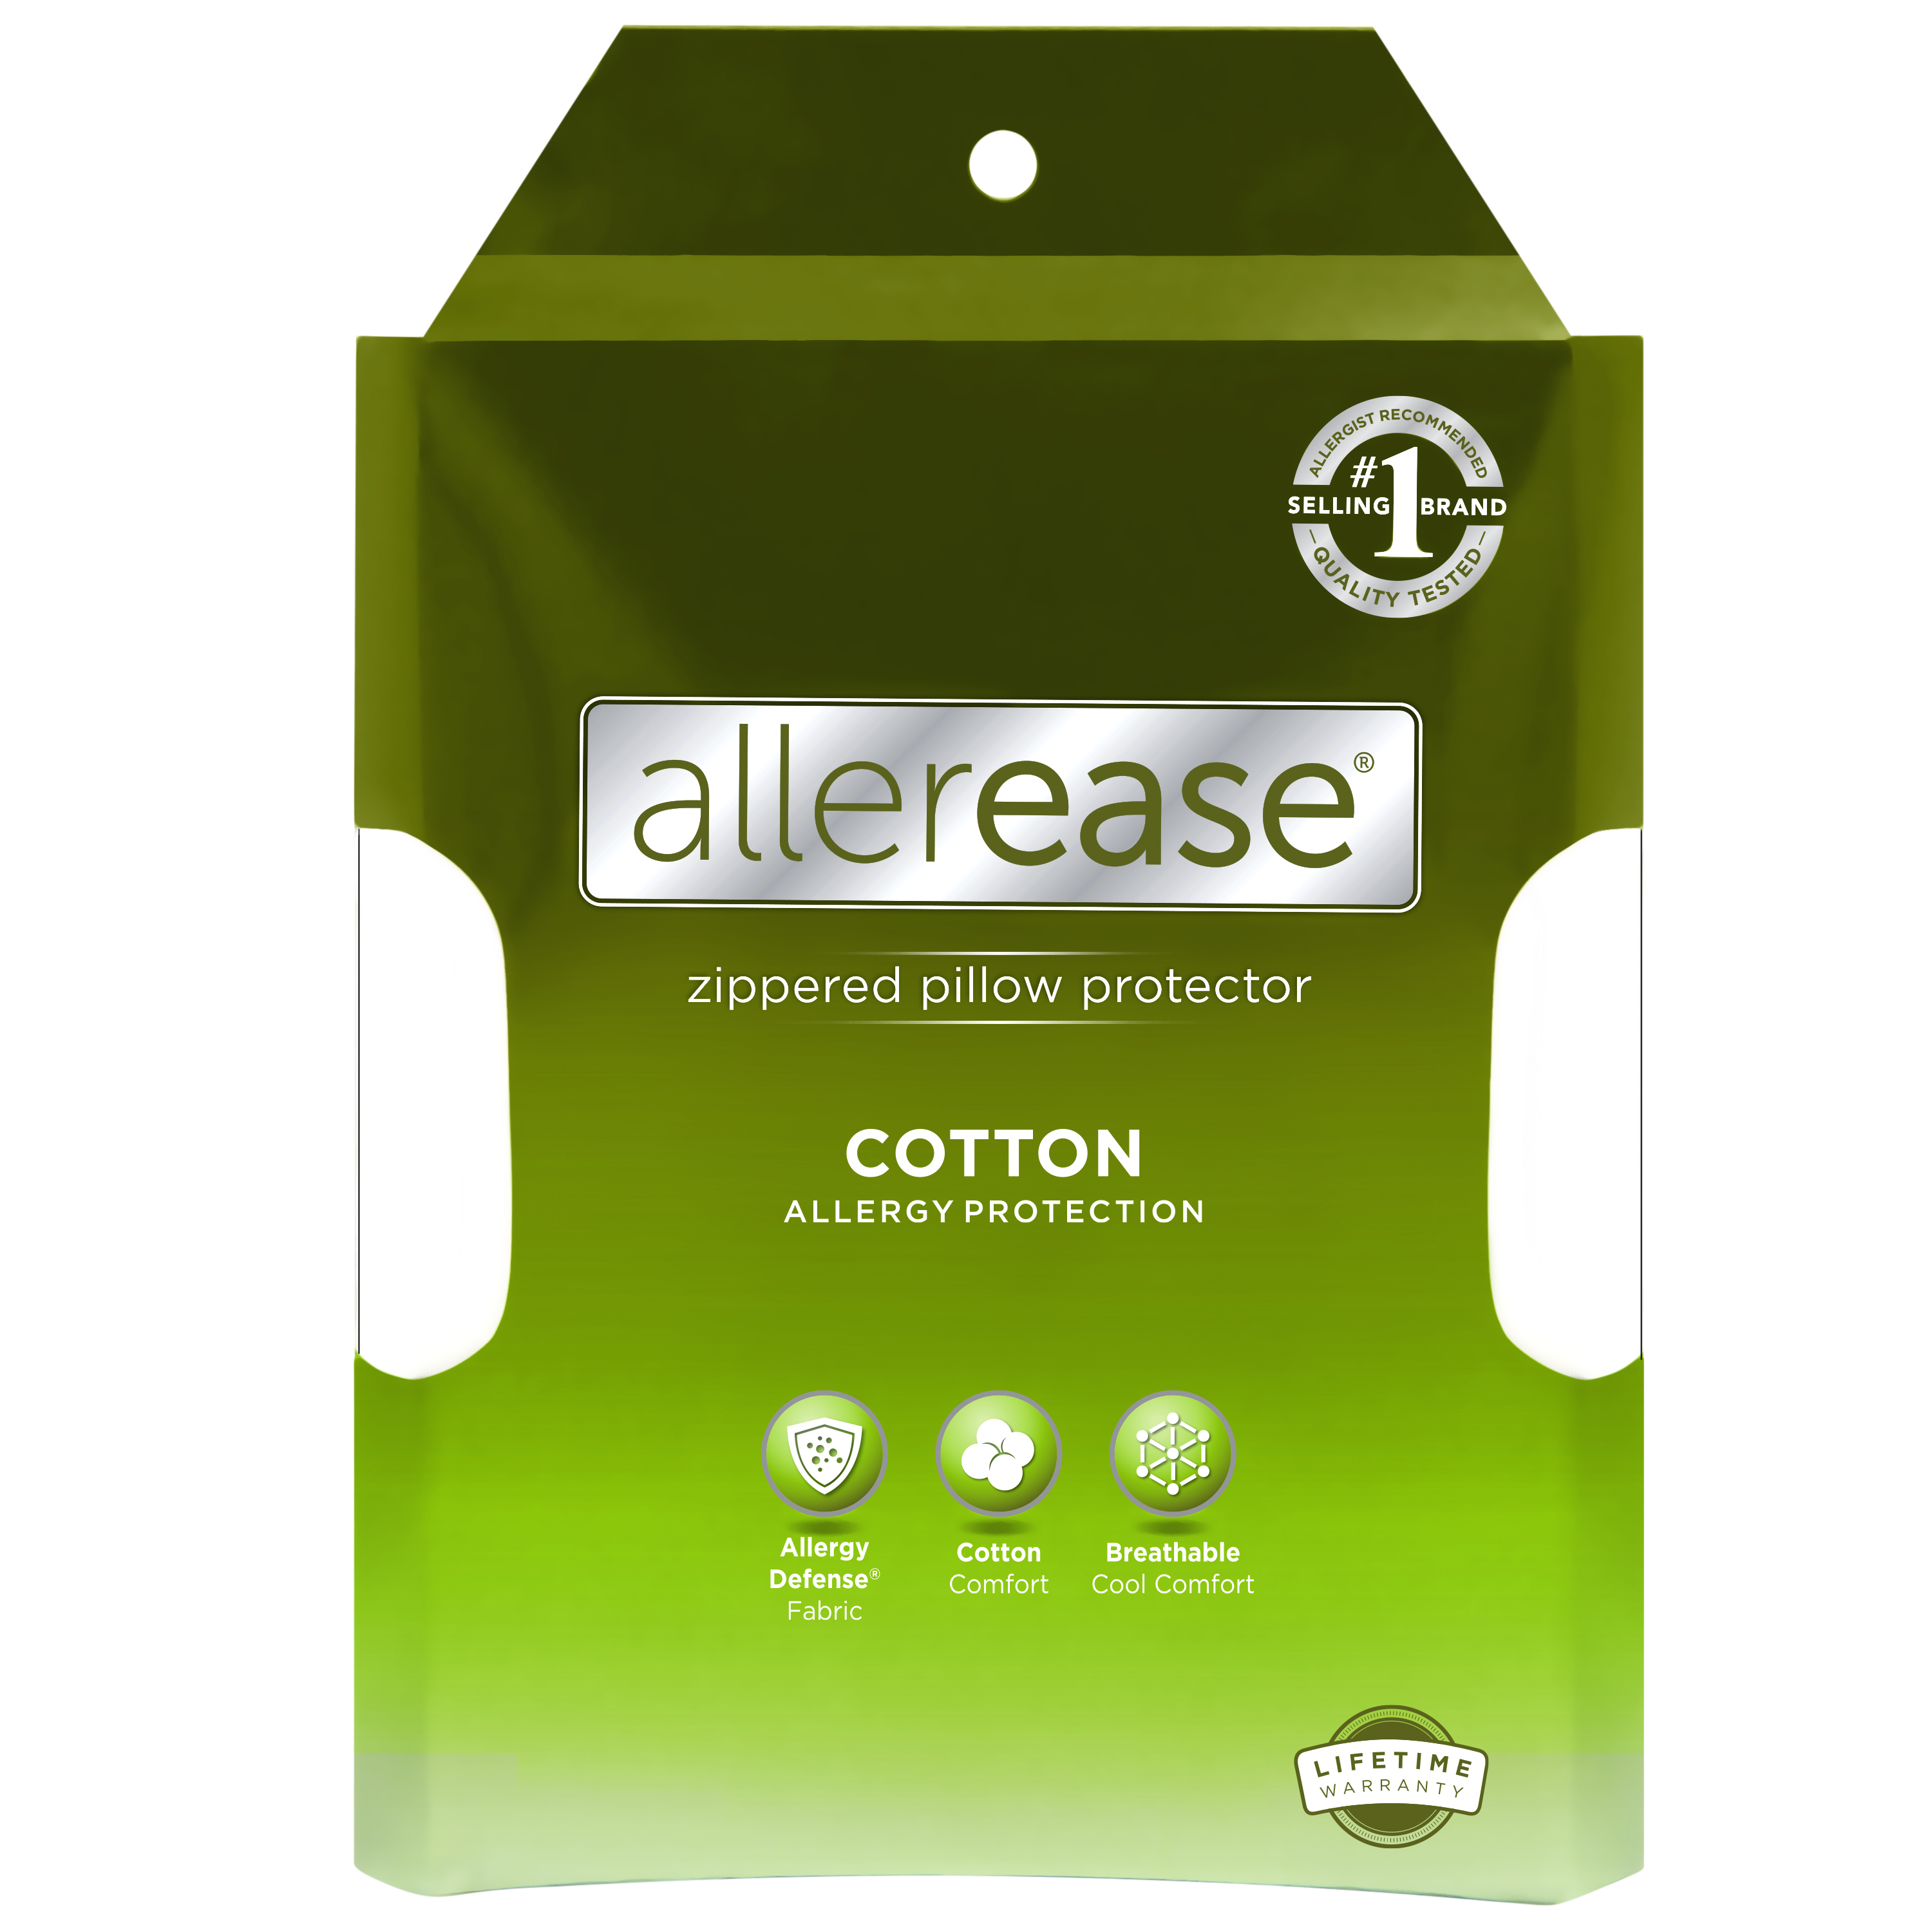 Allerease Cotton Zippered Pillow Protector, Standard, 2 Pack - image 1 of 8